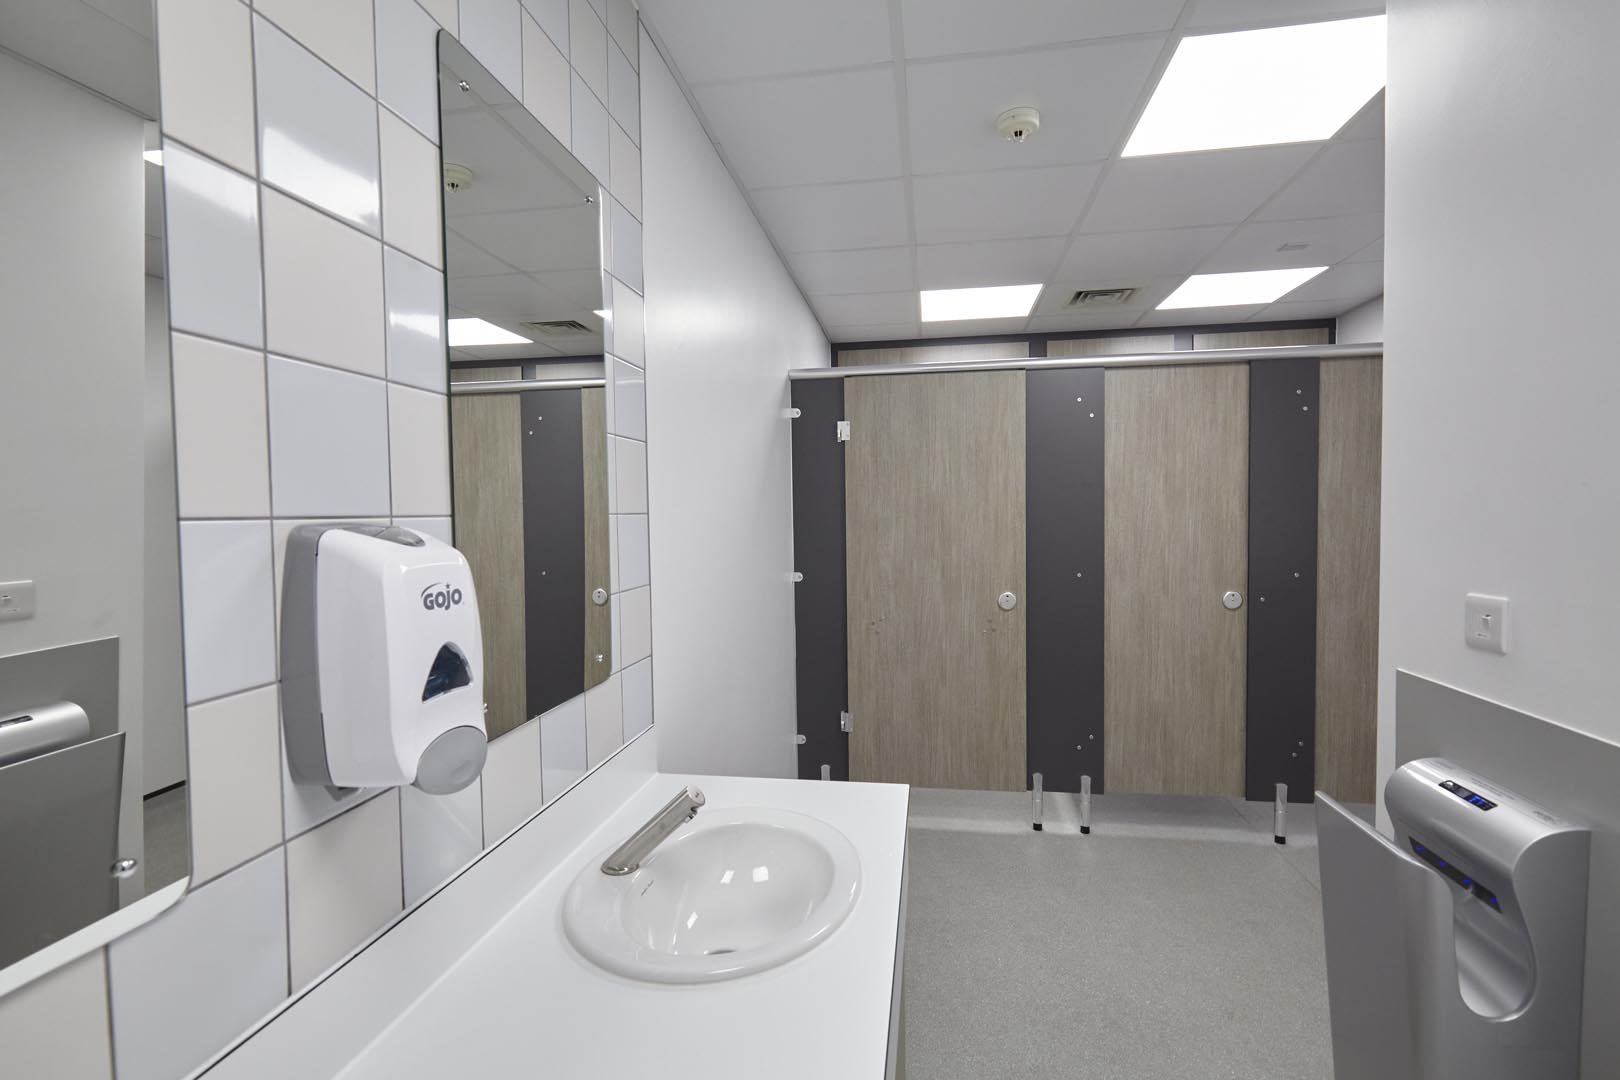 male washroom at leicester college with woodgrain toilets cubicles and a vanity unit hand wash area with feature tiling and mirror at leicester college.jpg